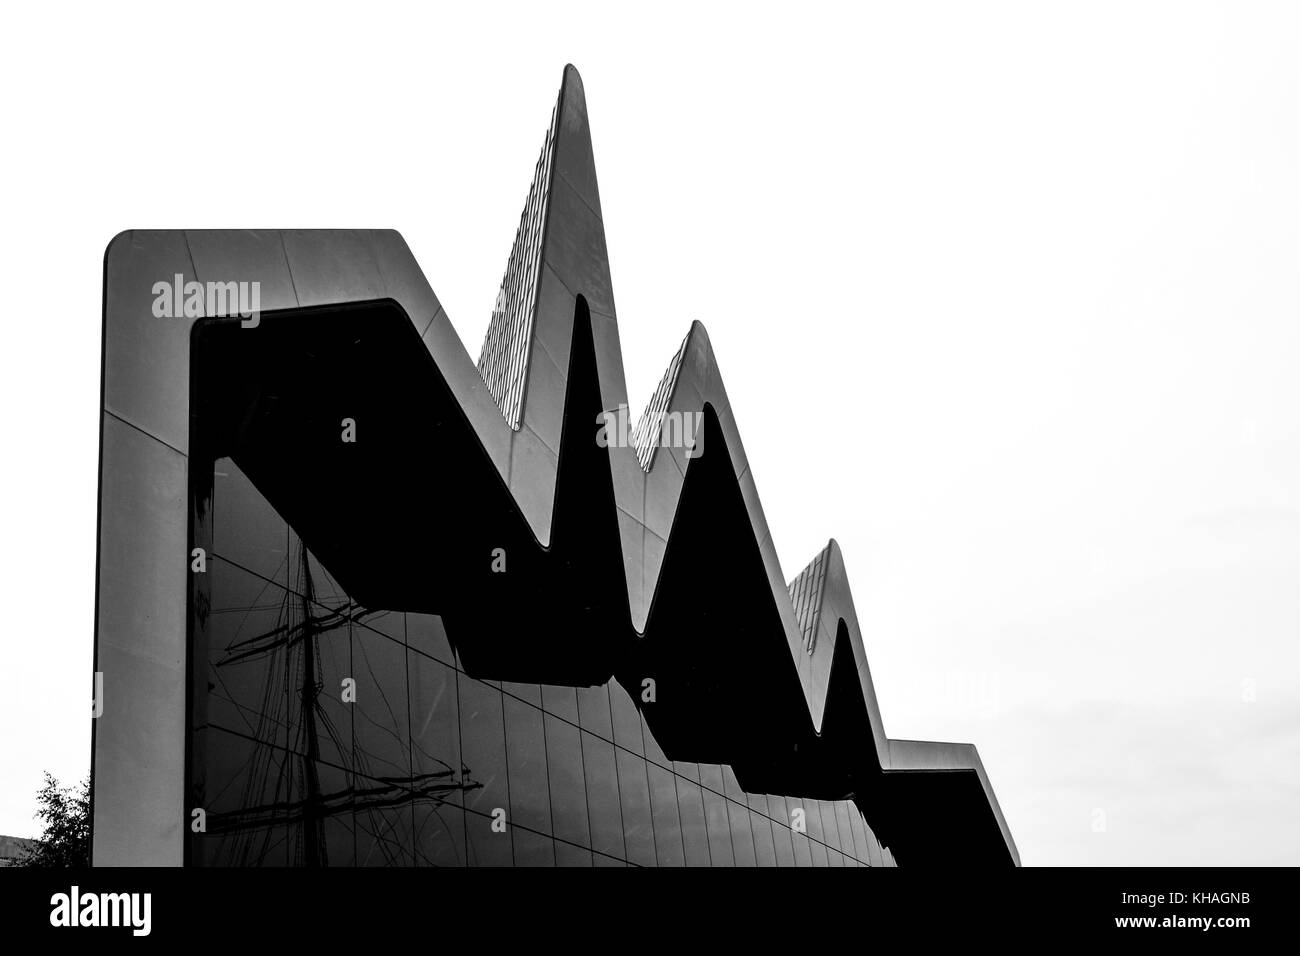 The cracking facade of the riverside museum designed by Zaha Hadid Architects. Located along the river Clyde of Glasgow, Scotland. Stock Photo